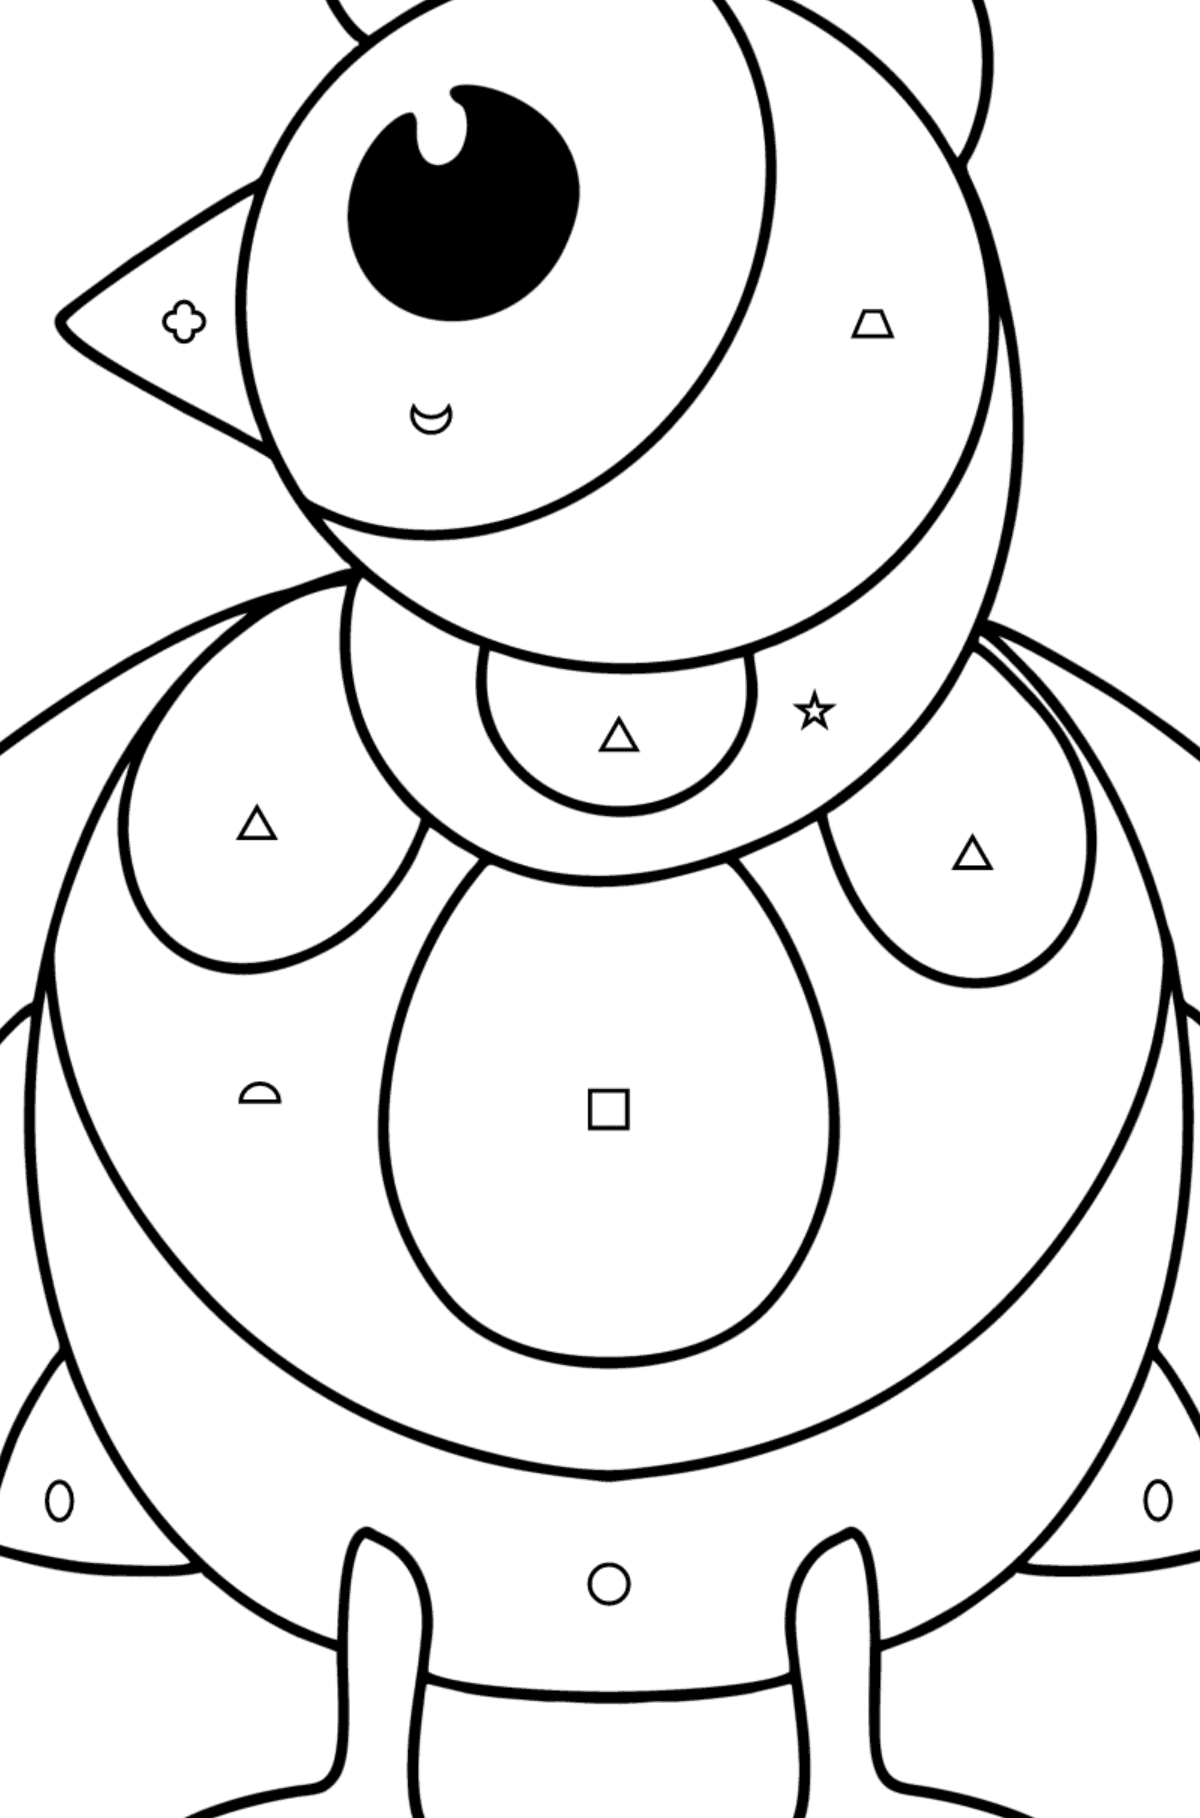 Chicken Anti stress coloring page - Coloring by Geometric Shapes for Kids